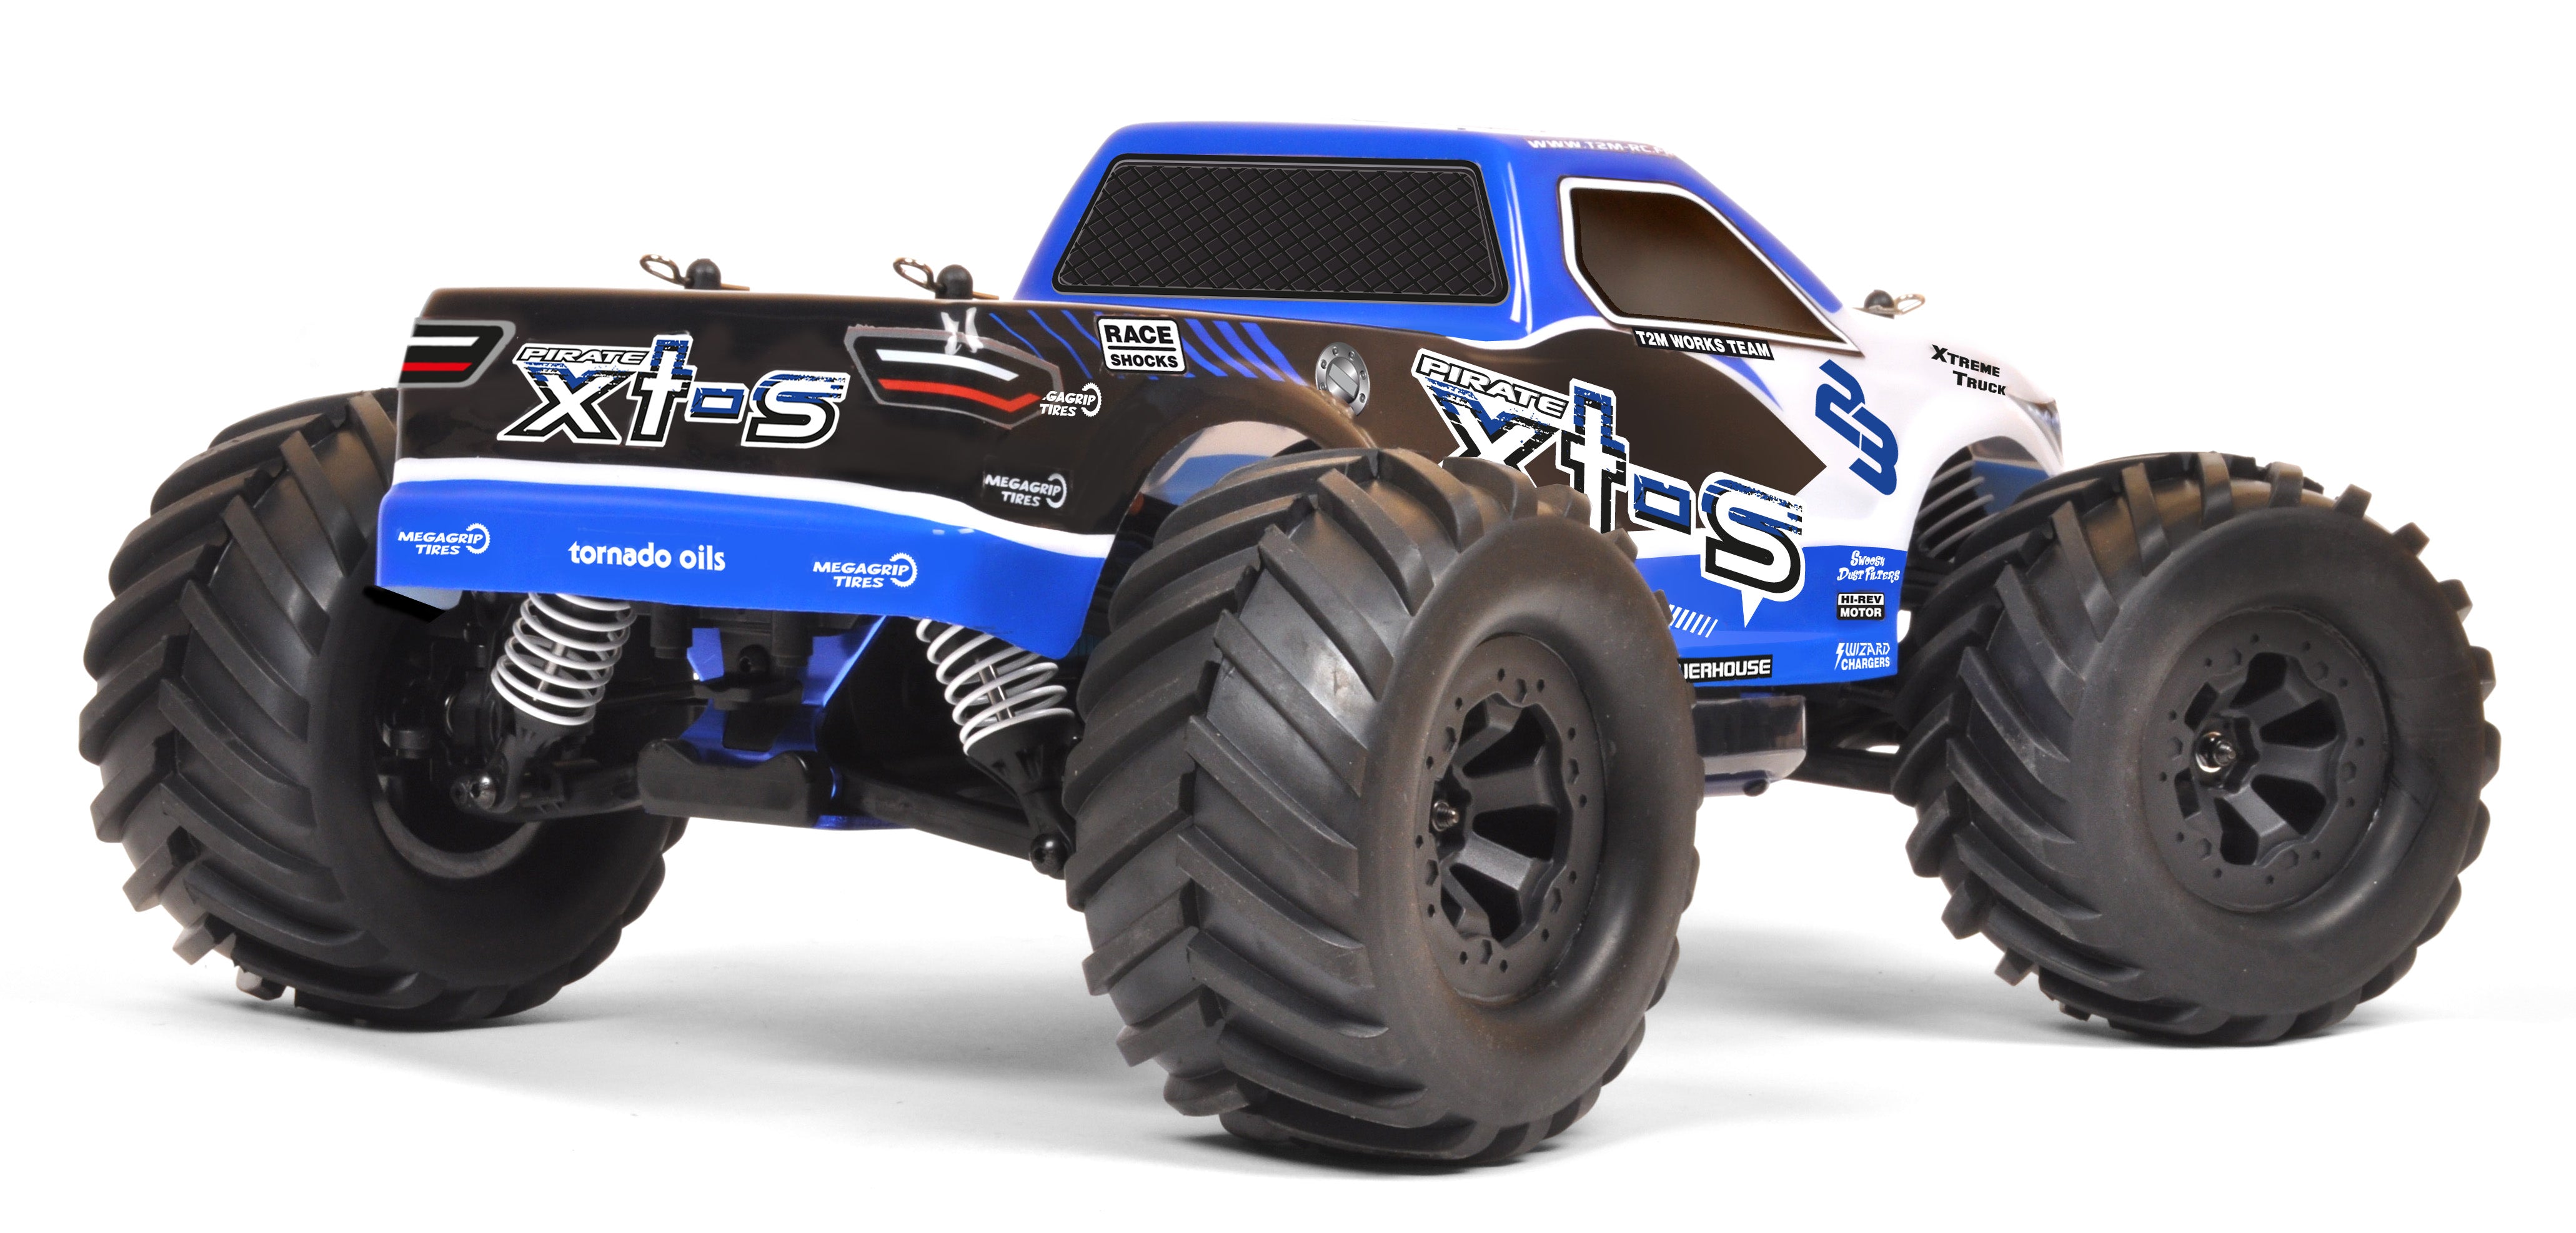 T2M PIRATE XT-S BRUSHLESS RTR avec chargeur - DISCOUNT